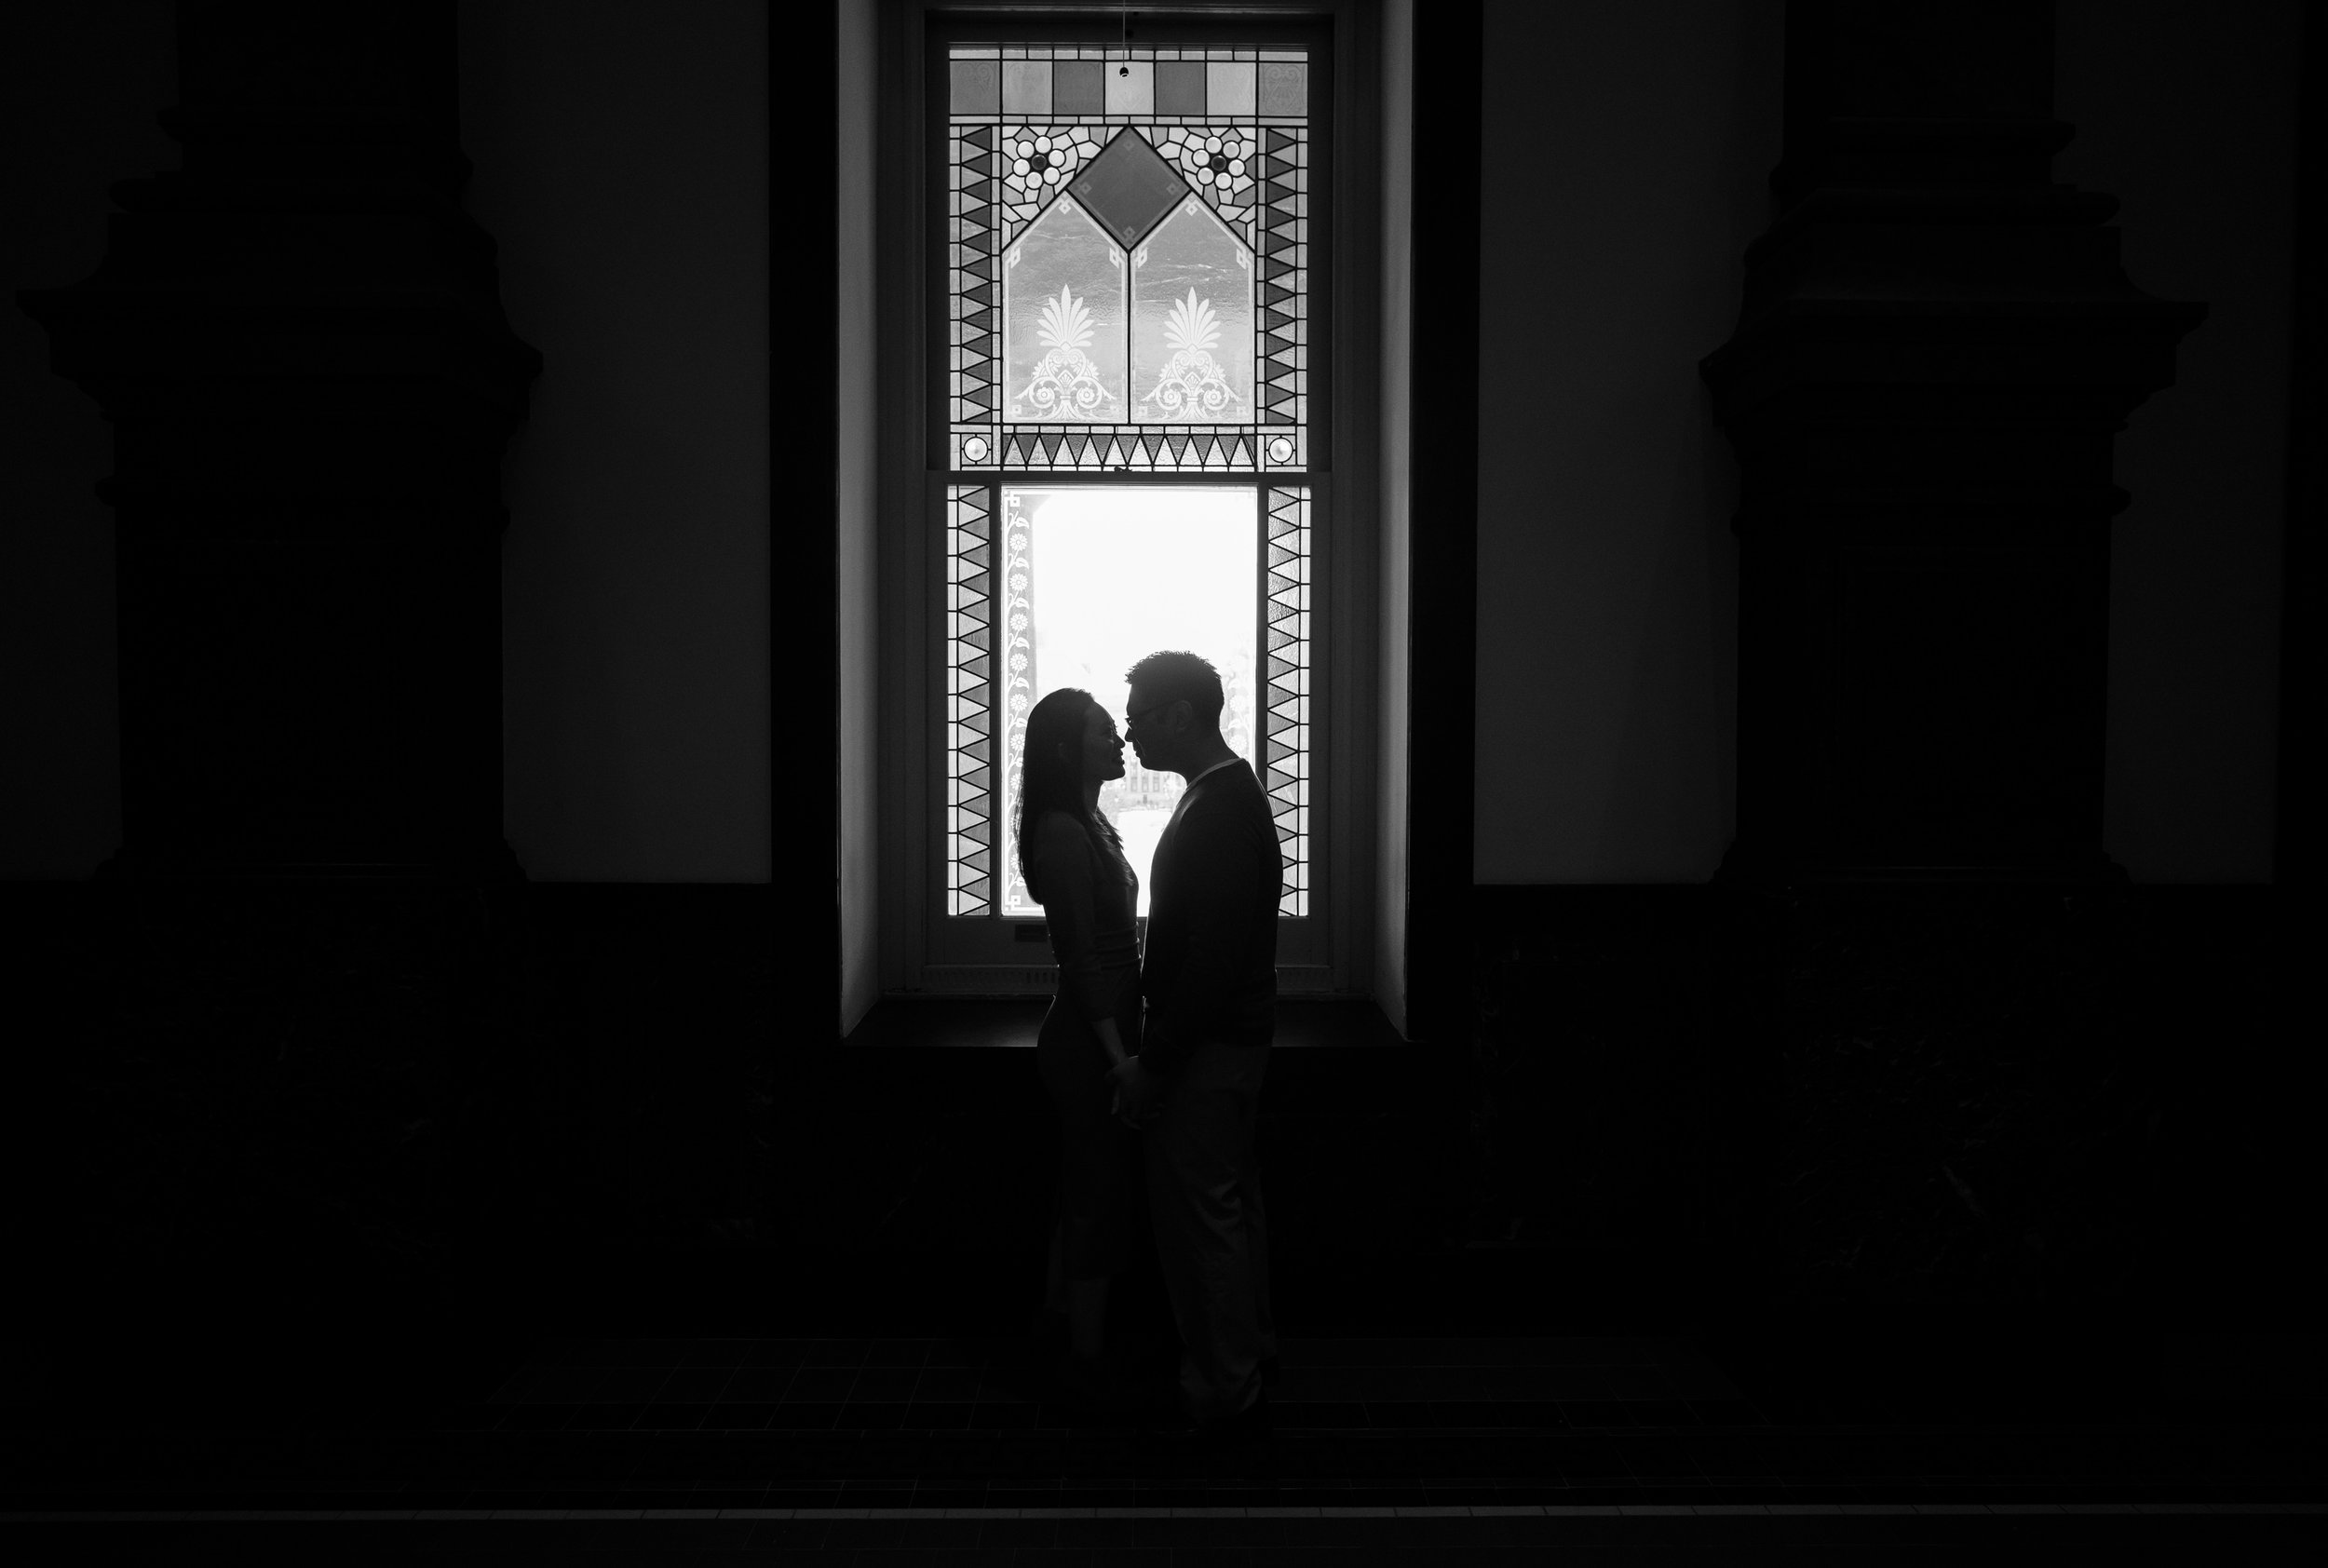 Black and white silhouette engagement photos at the Smithsonian museum